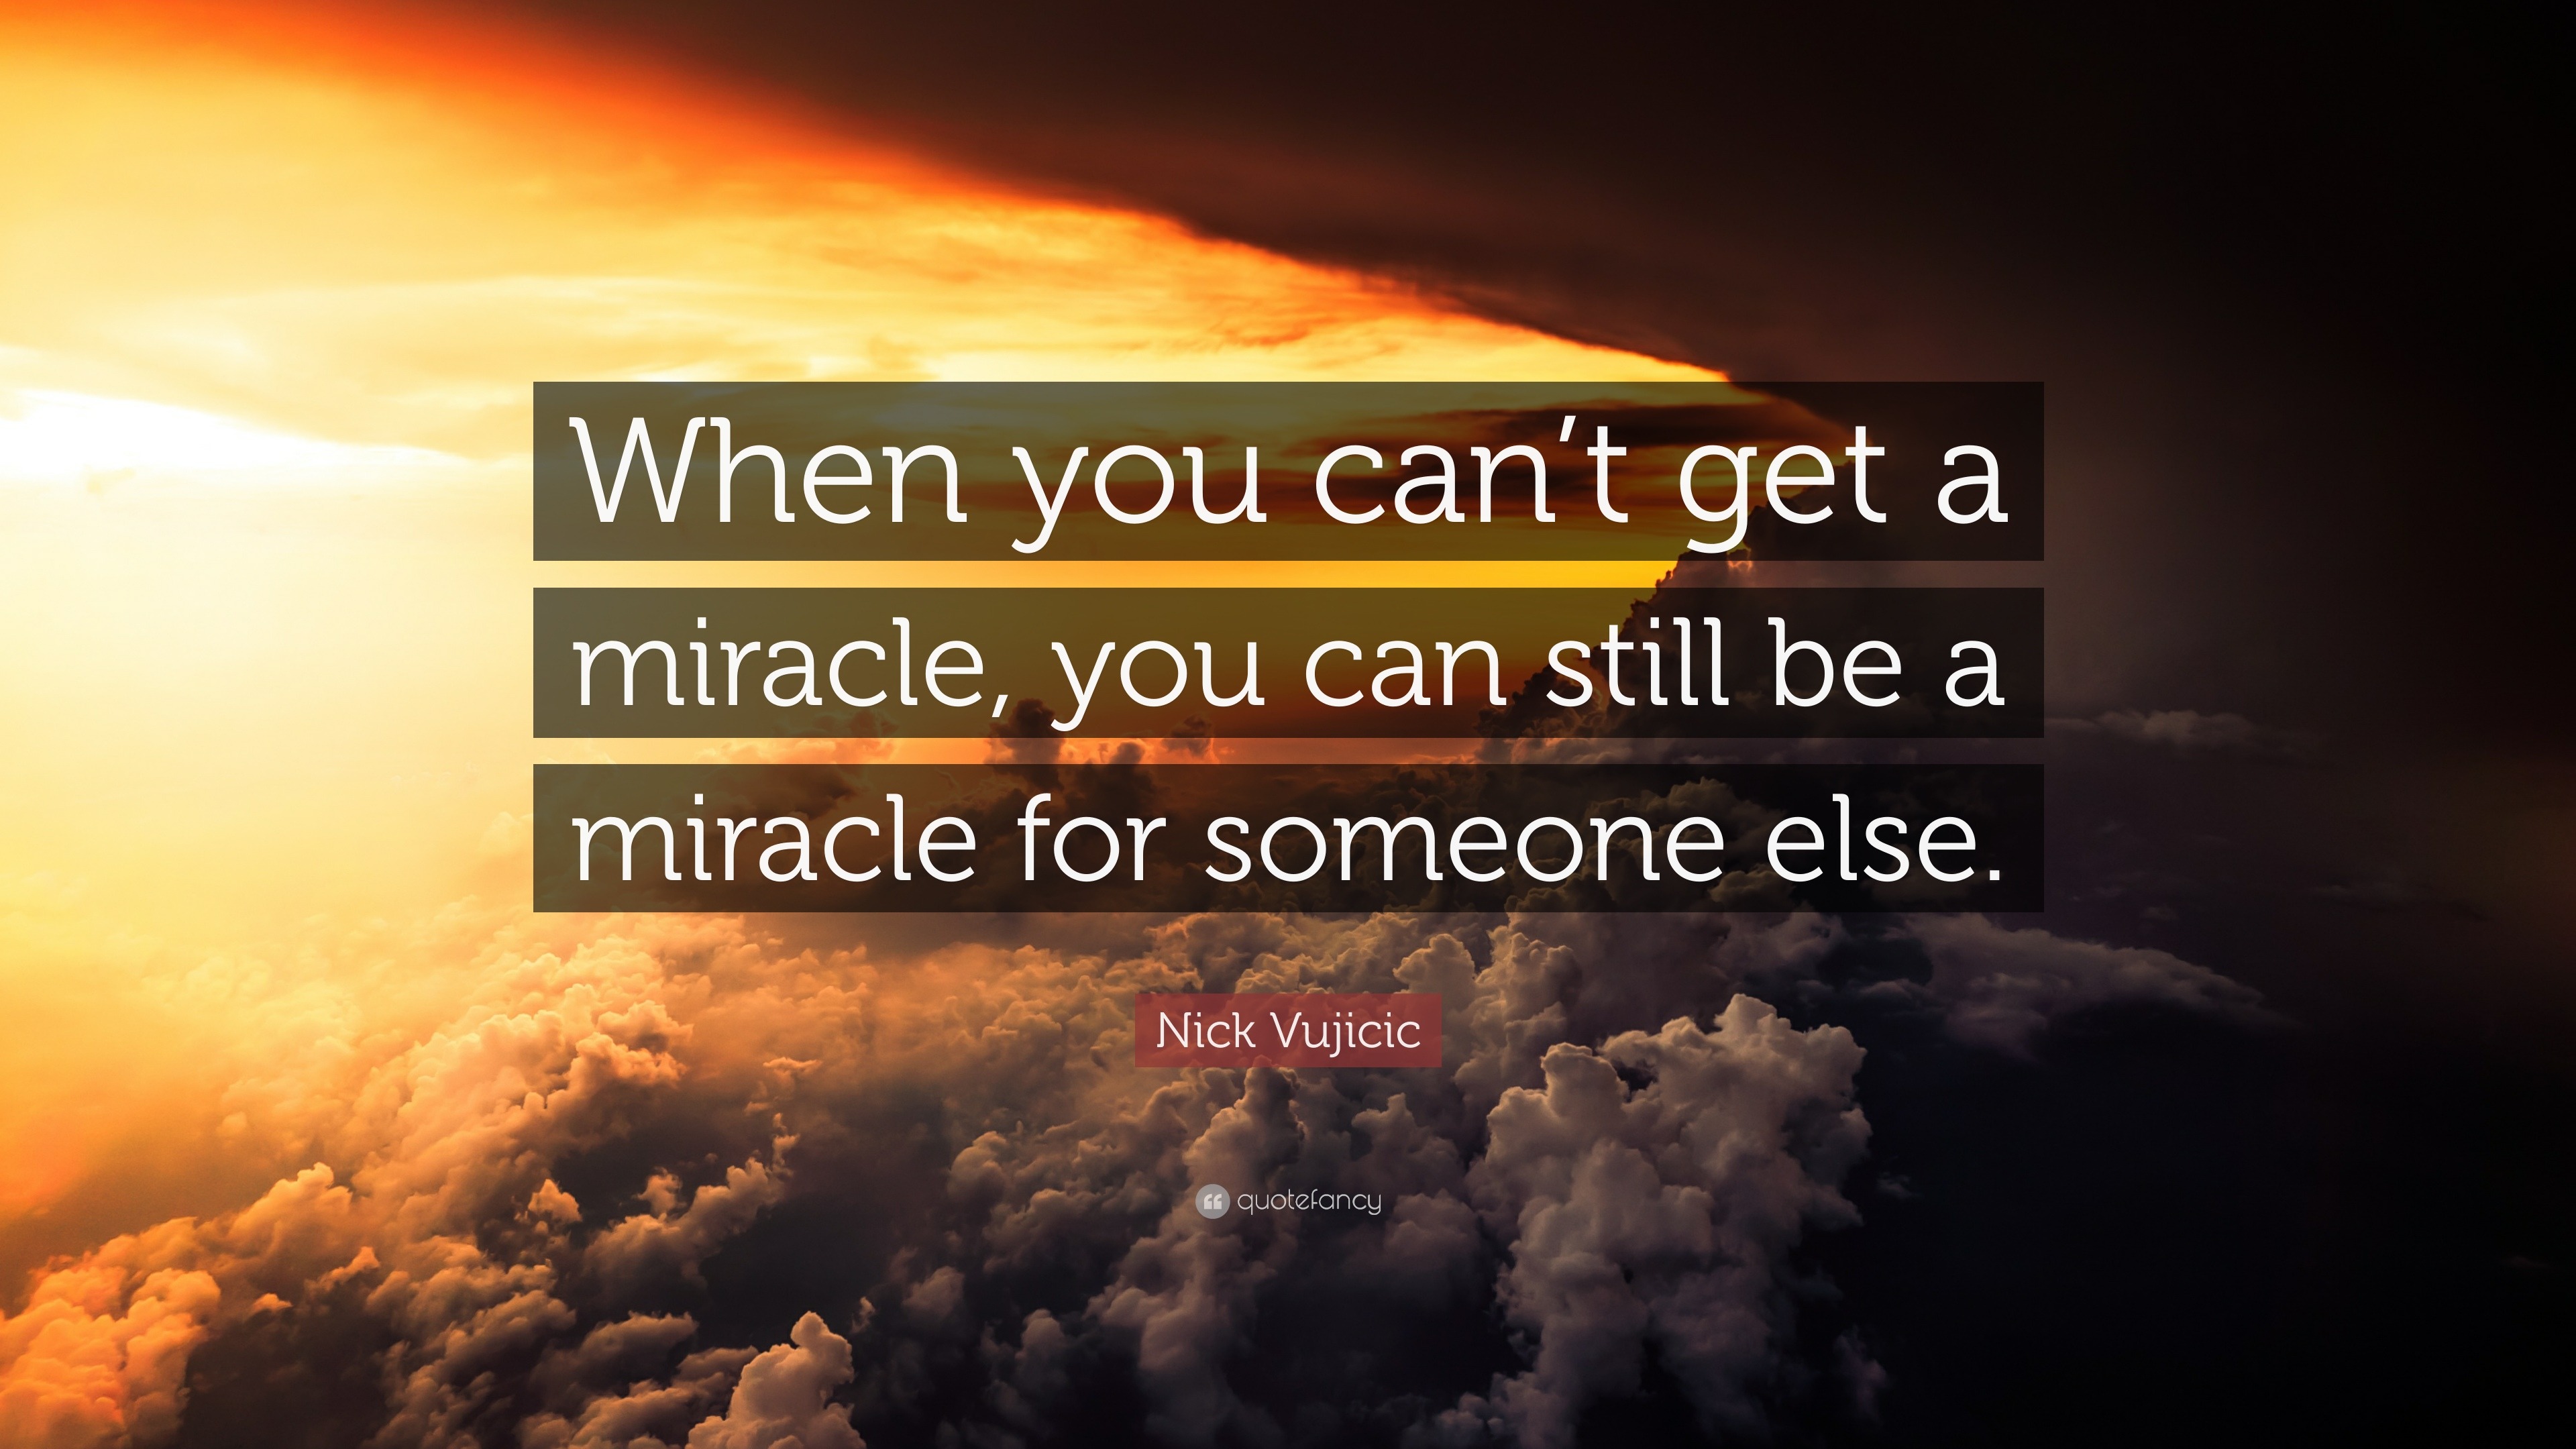 Nick Vujicic Quote: “When you can’t get a miracle, you can still be a ...